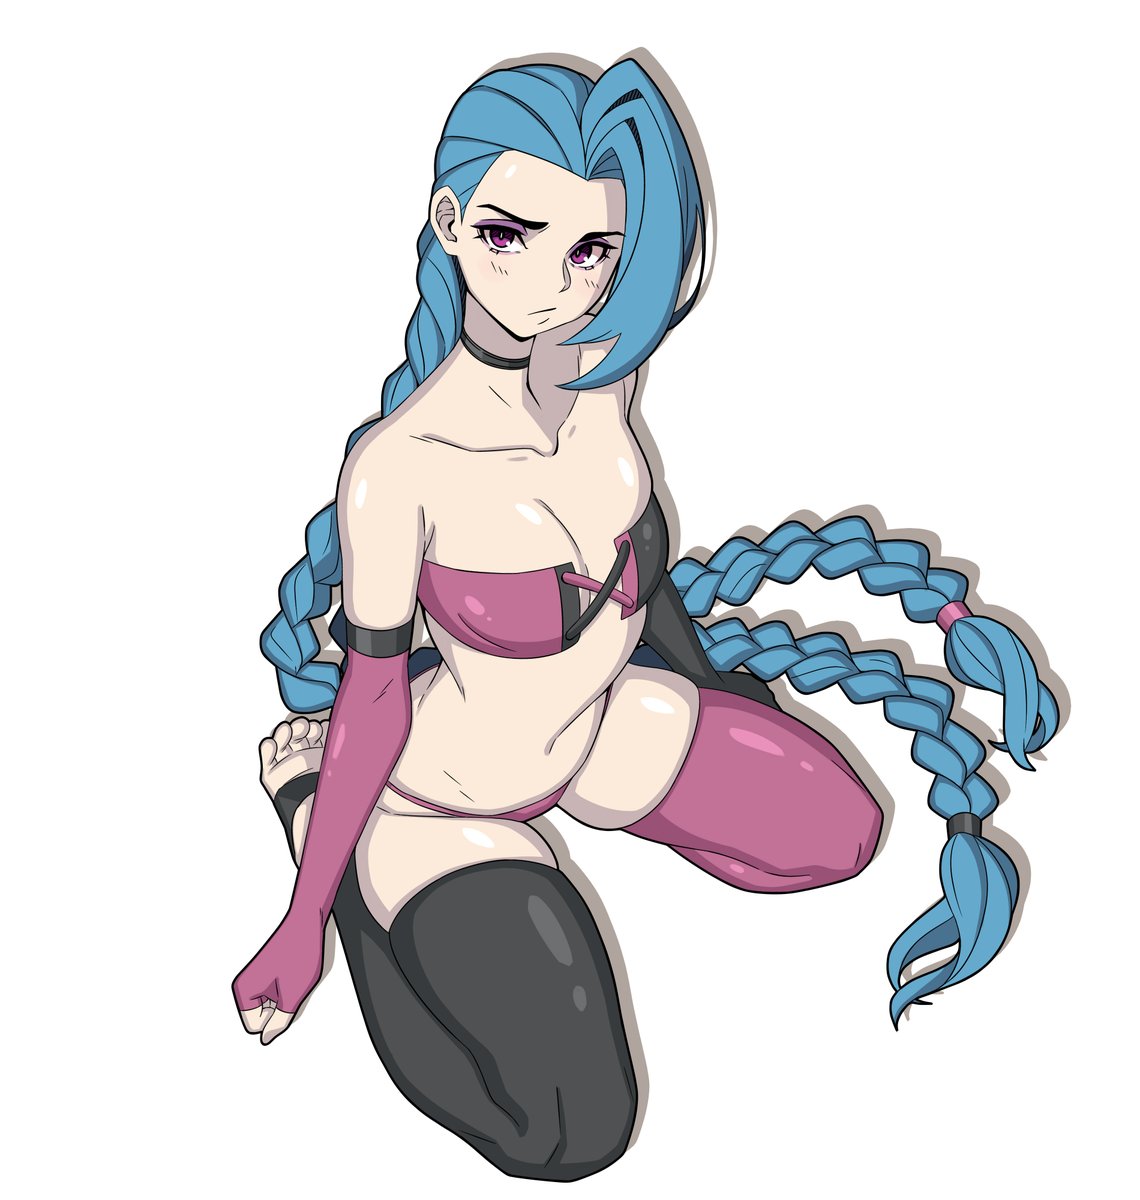 New publication Jinx / League of Legends 🖤💣 I wanted to draw Jinx for a long time and today was the day, I hope you like this little fanart 🖤💣 #Jinx #LeagueOfLegends #LeagueOfLegendsFanArt